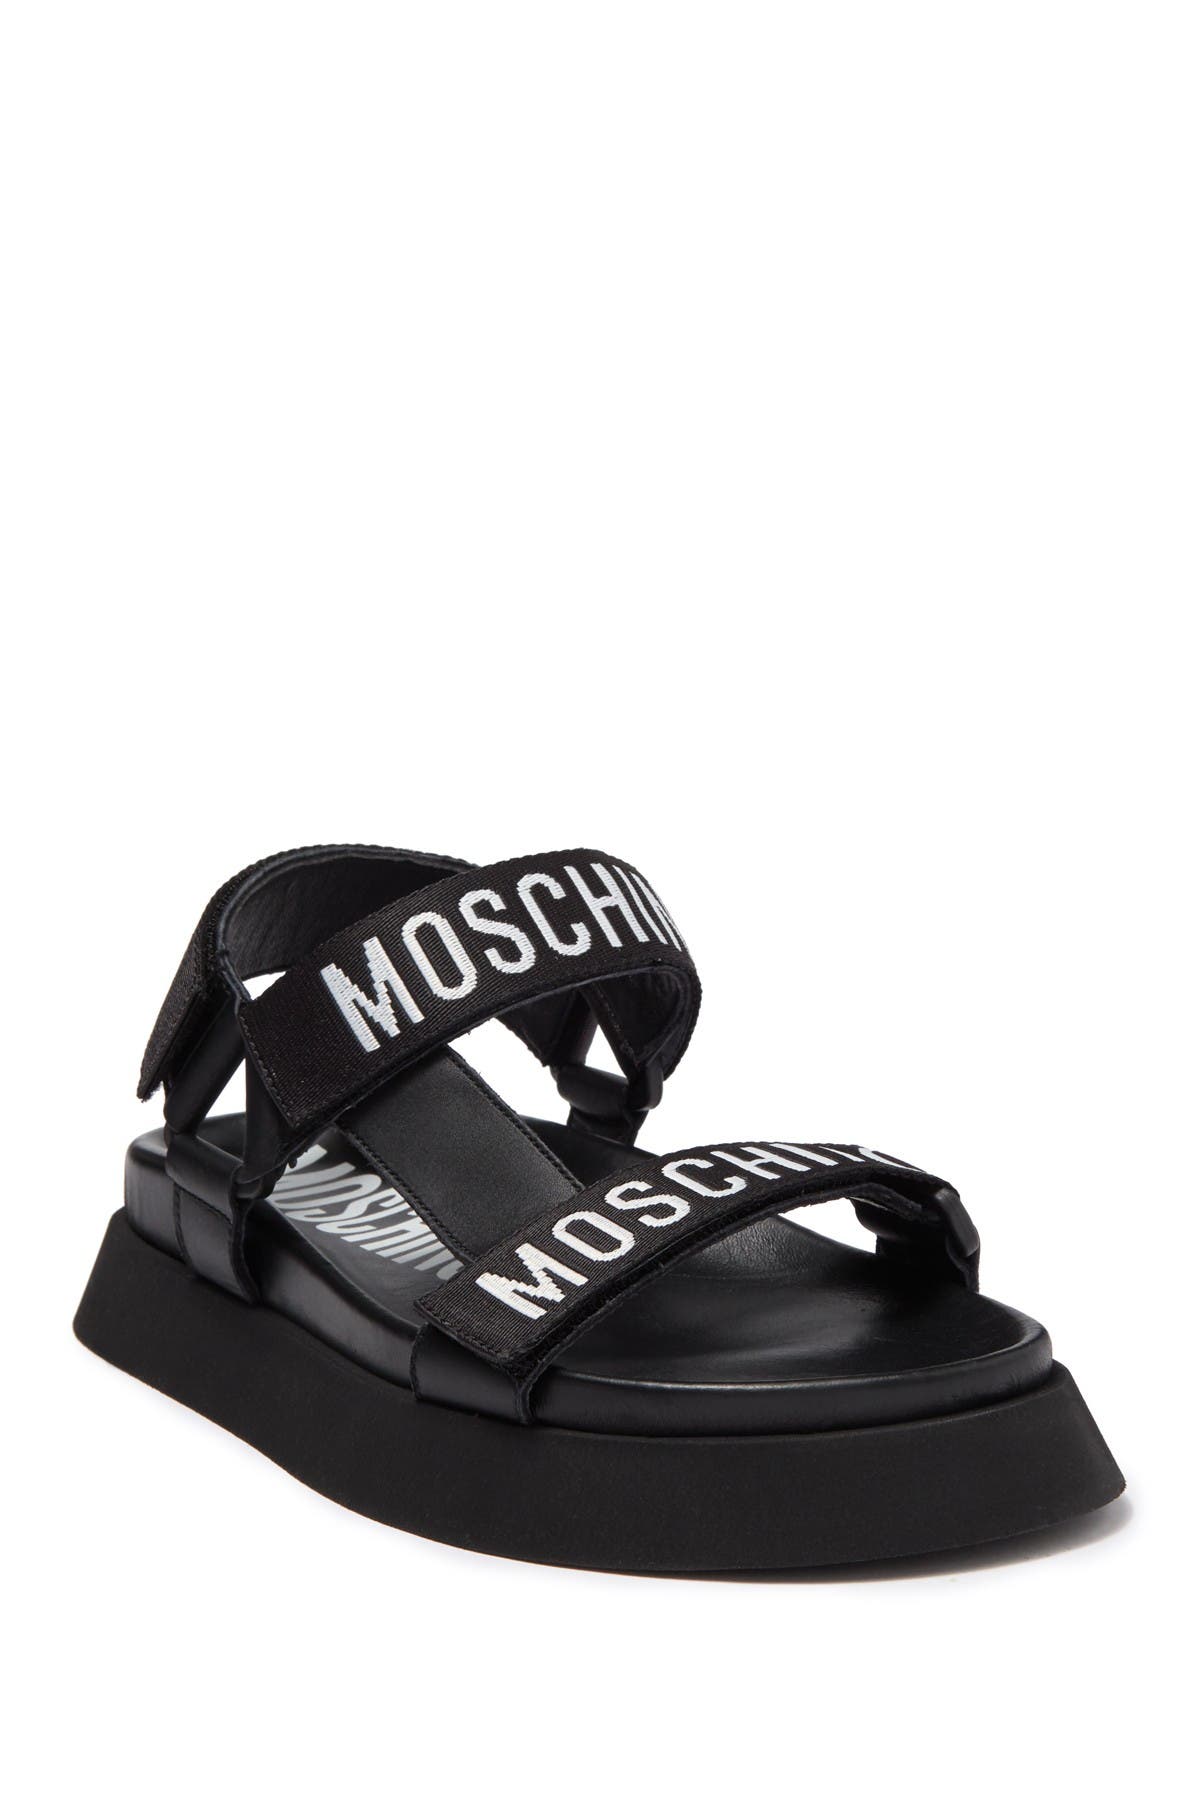 moschino sandals with strap and logo